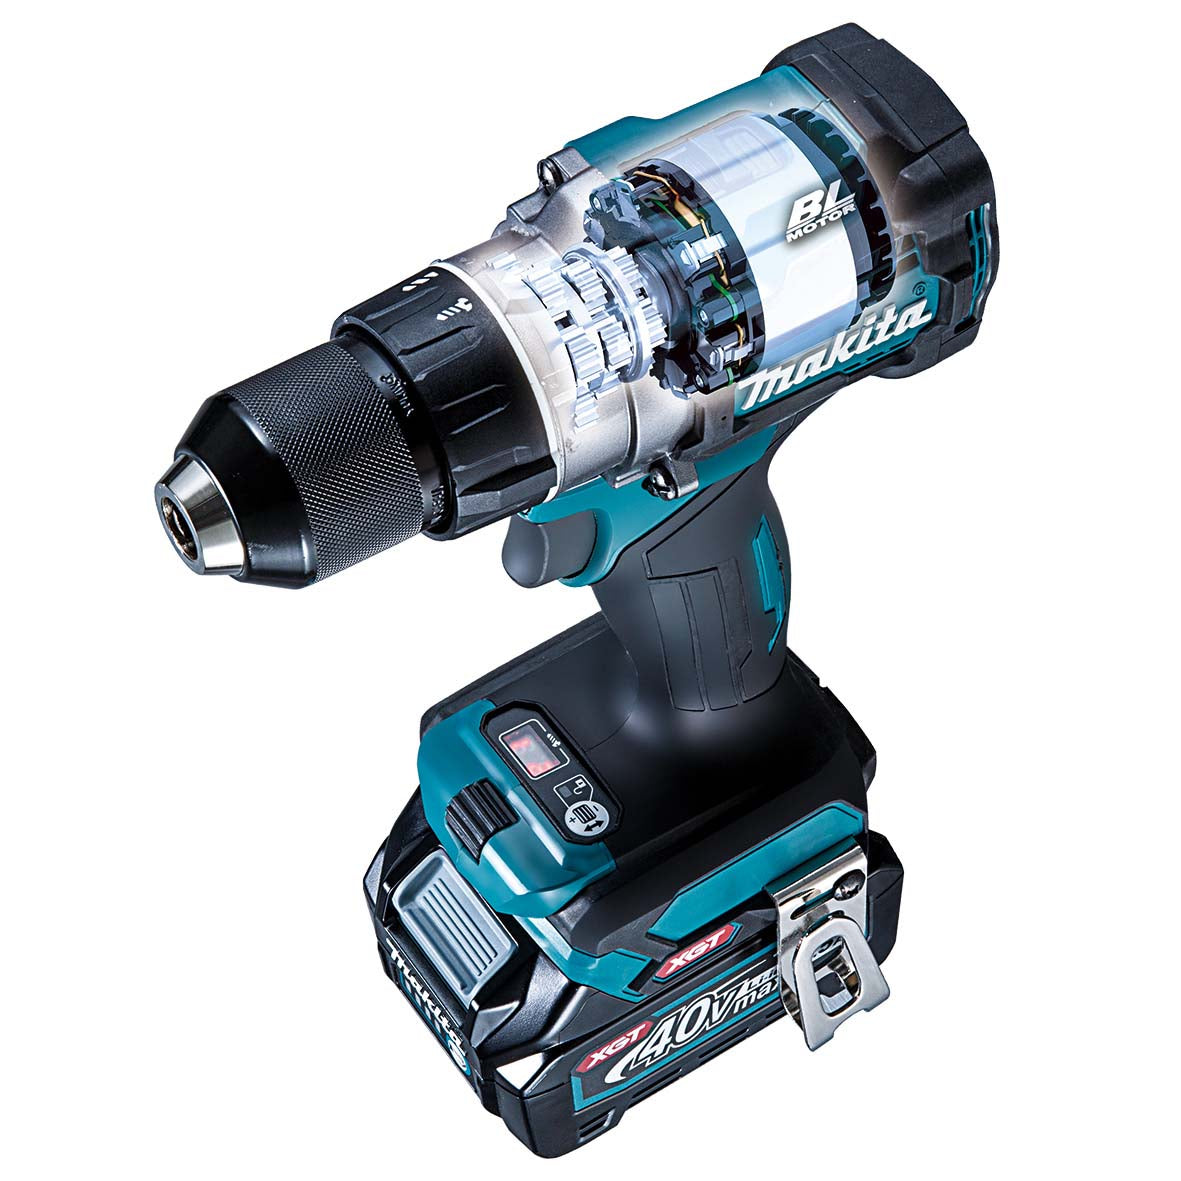 40V Brushless Driver Drill Bare (Tool Only) DF001GZ by Makita